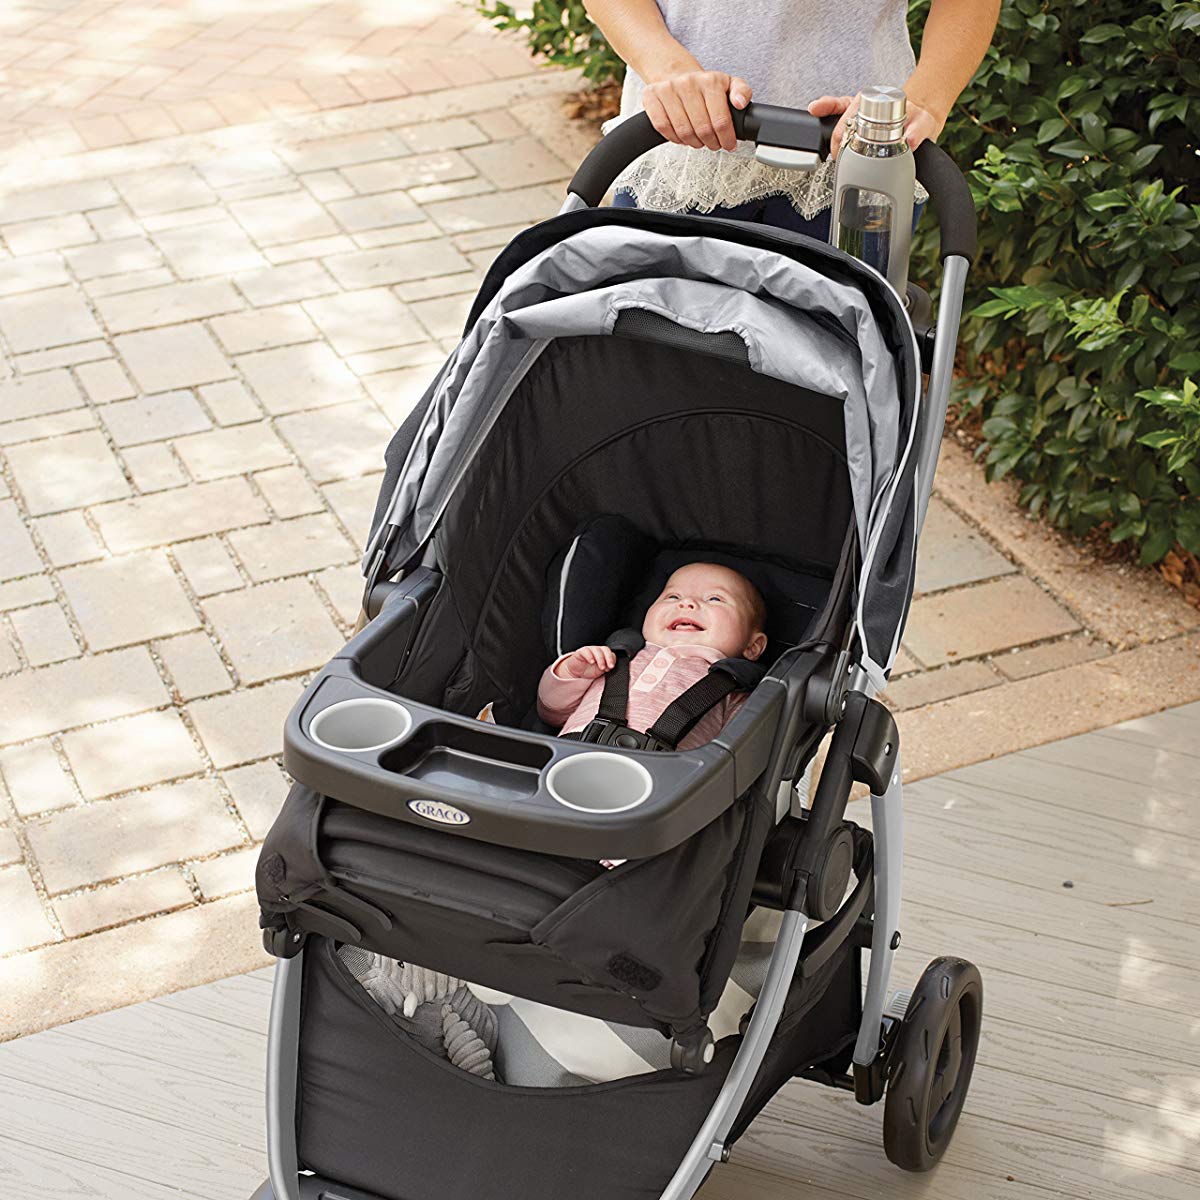 graco pace stroller amazon